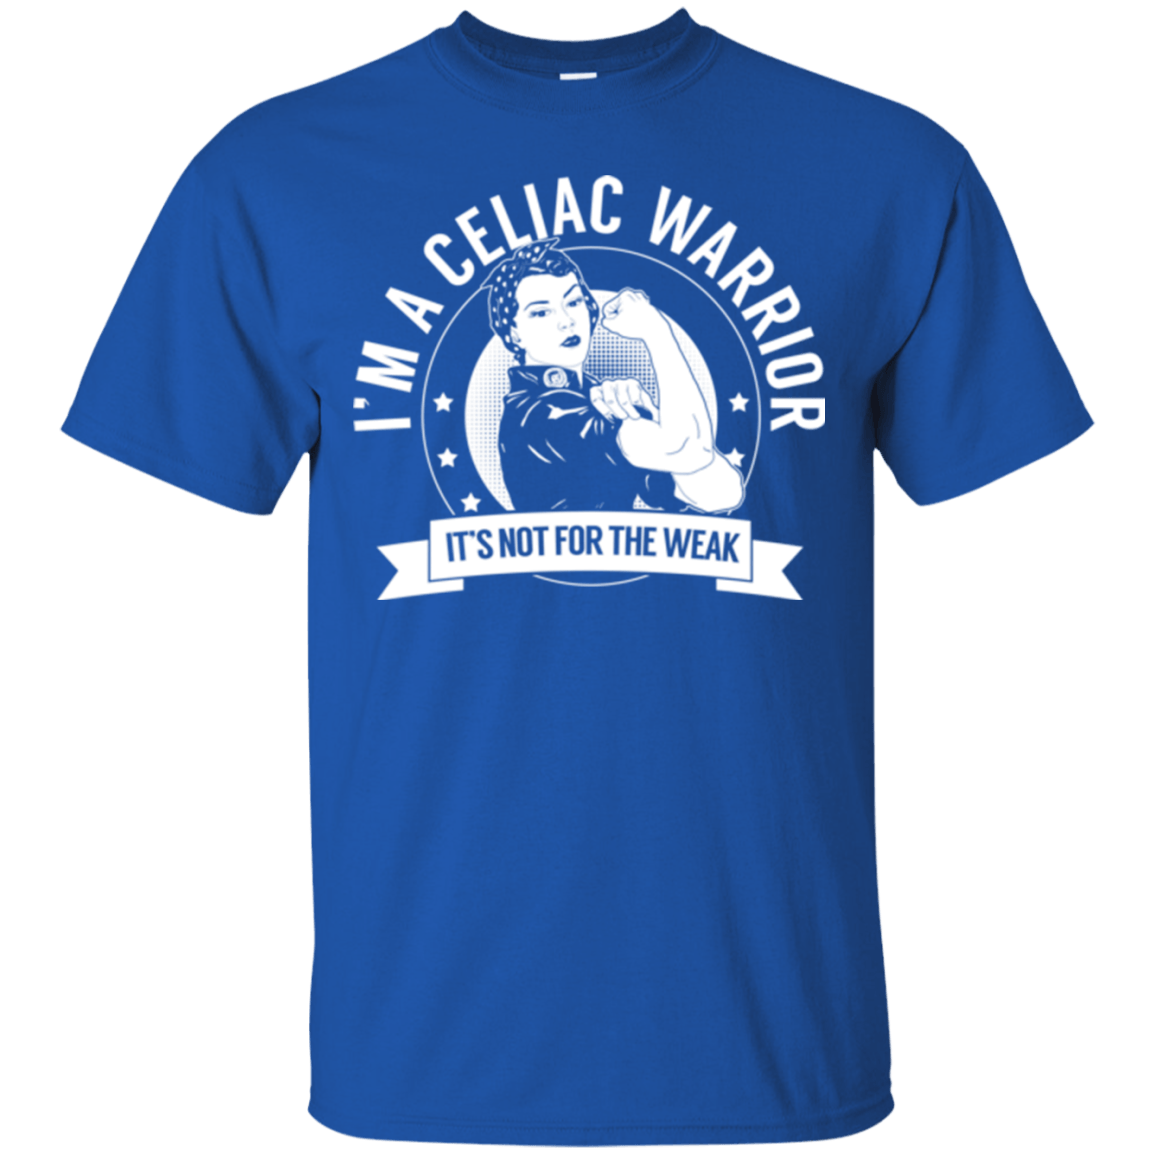 Celiac Warrior Not For The Weak Unisex Shirt - The Unchargeables